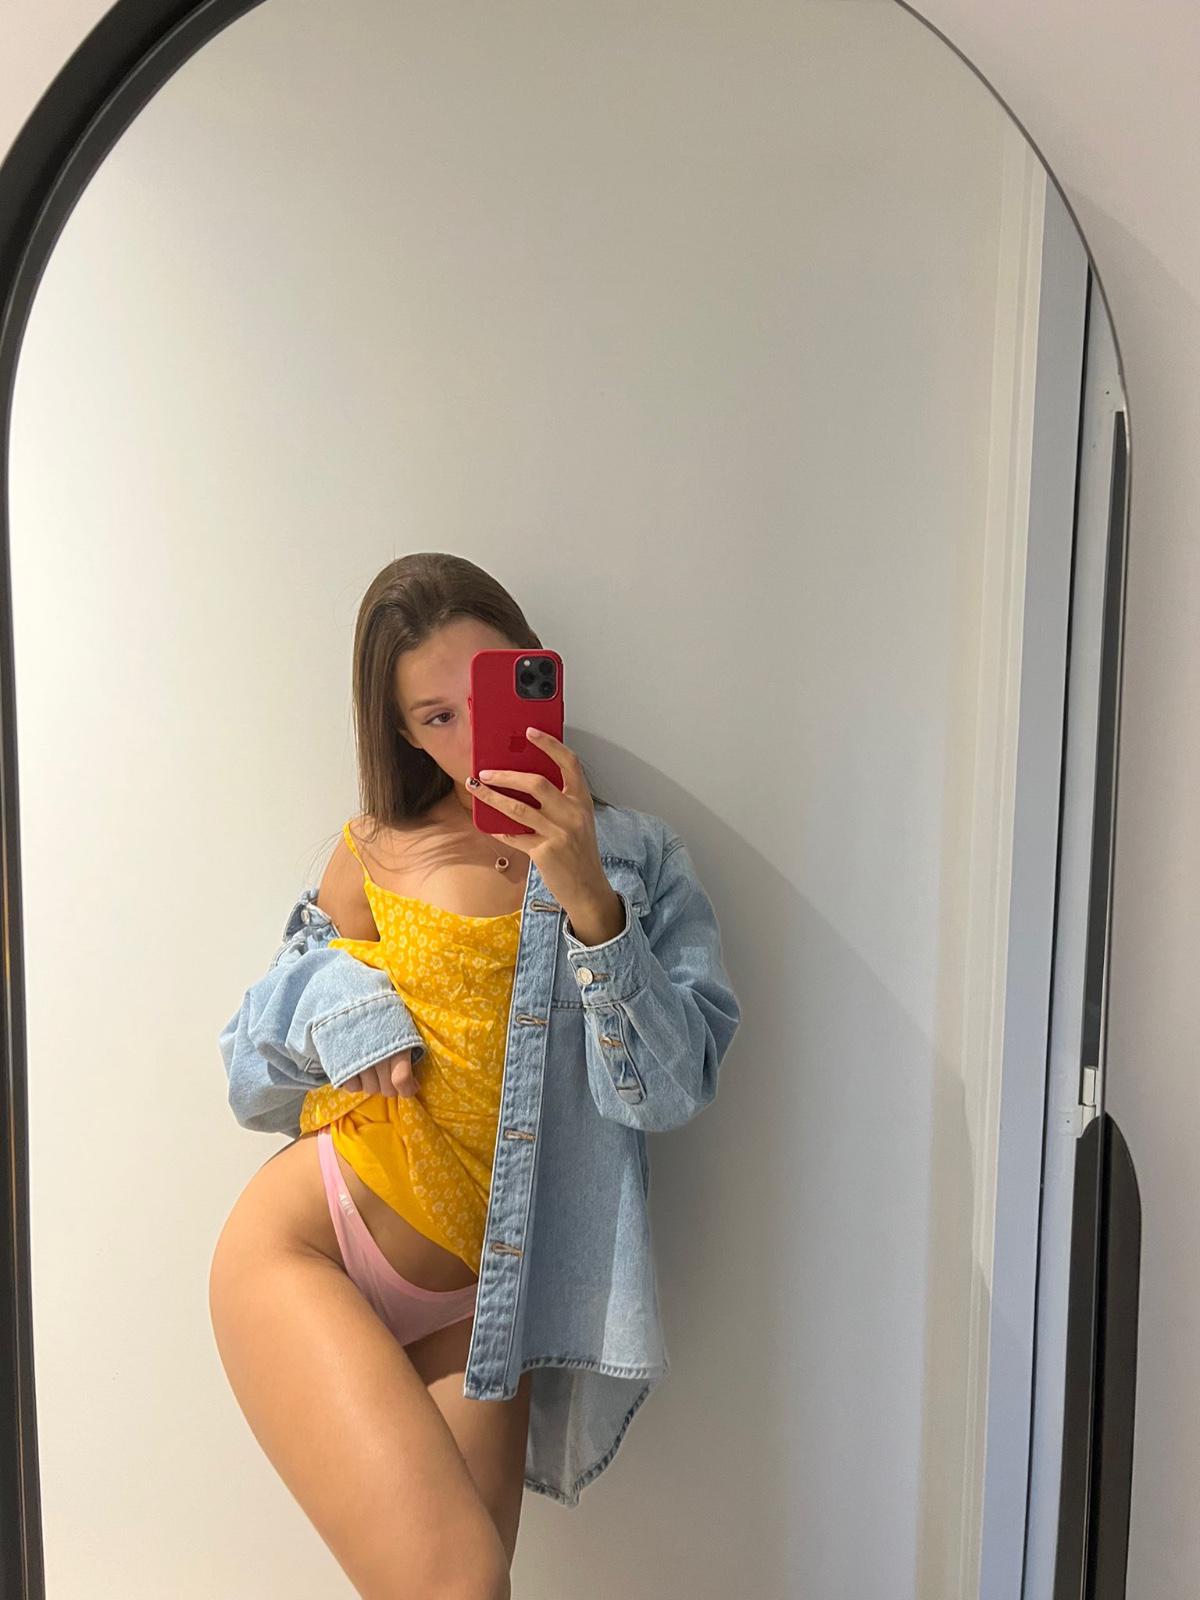 I’m available for sex fun 100 percent honest, real, genuine. No games 🌹❤️